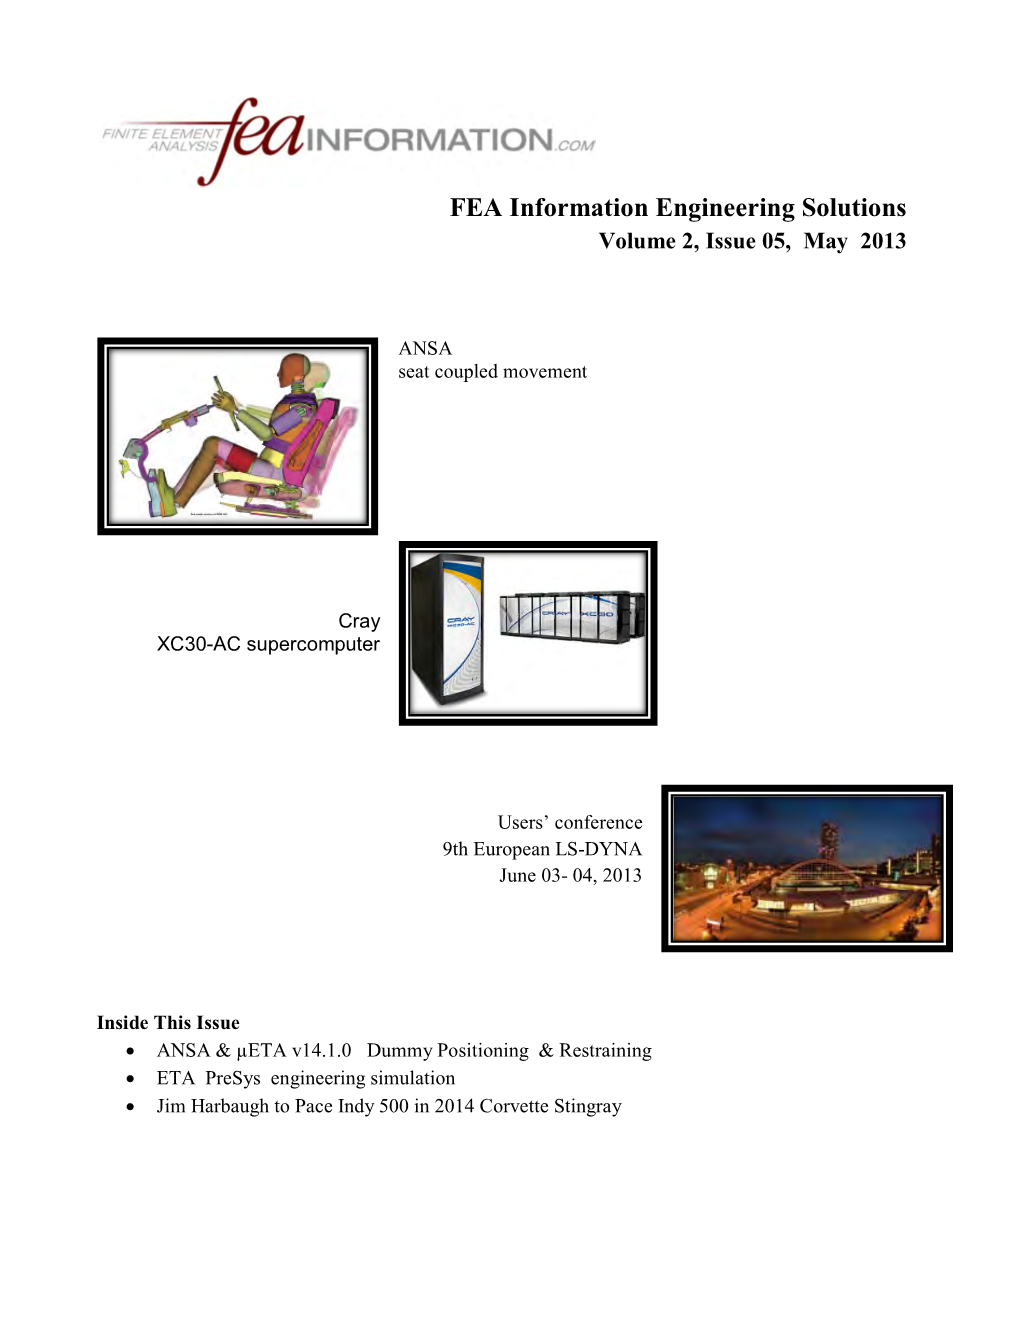 FEA Information Engineering Solutions Mayh 2013